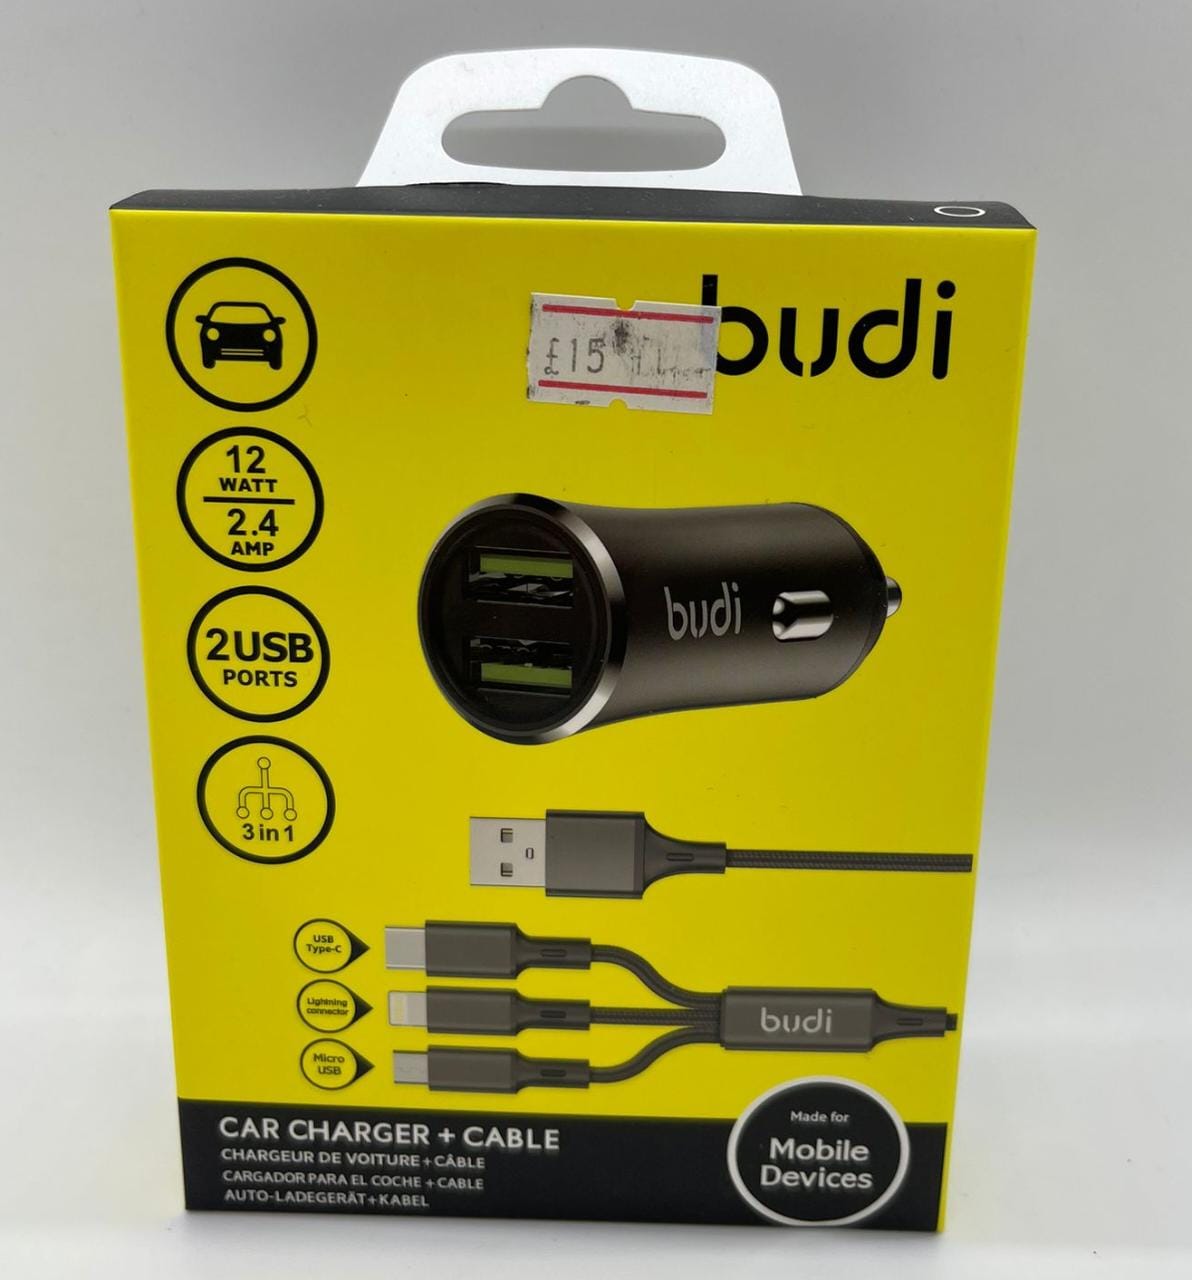 Car Charger + Cable